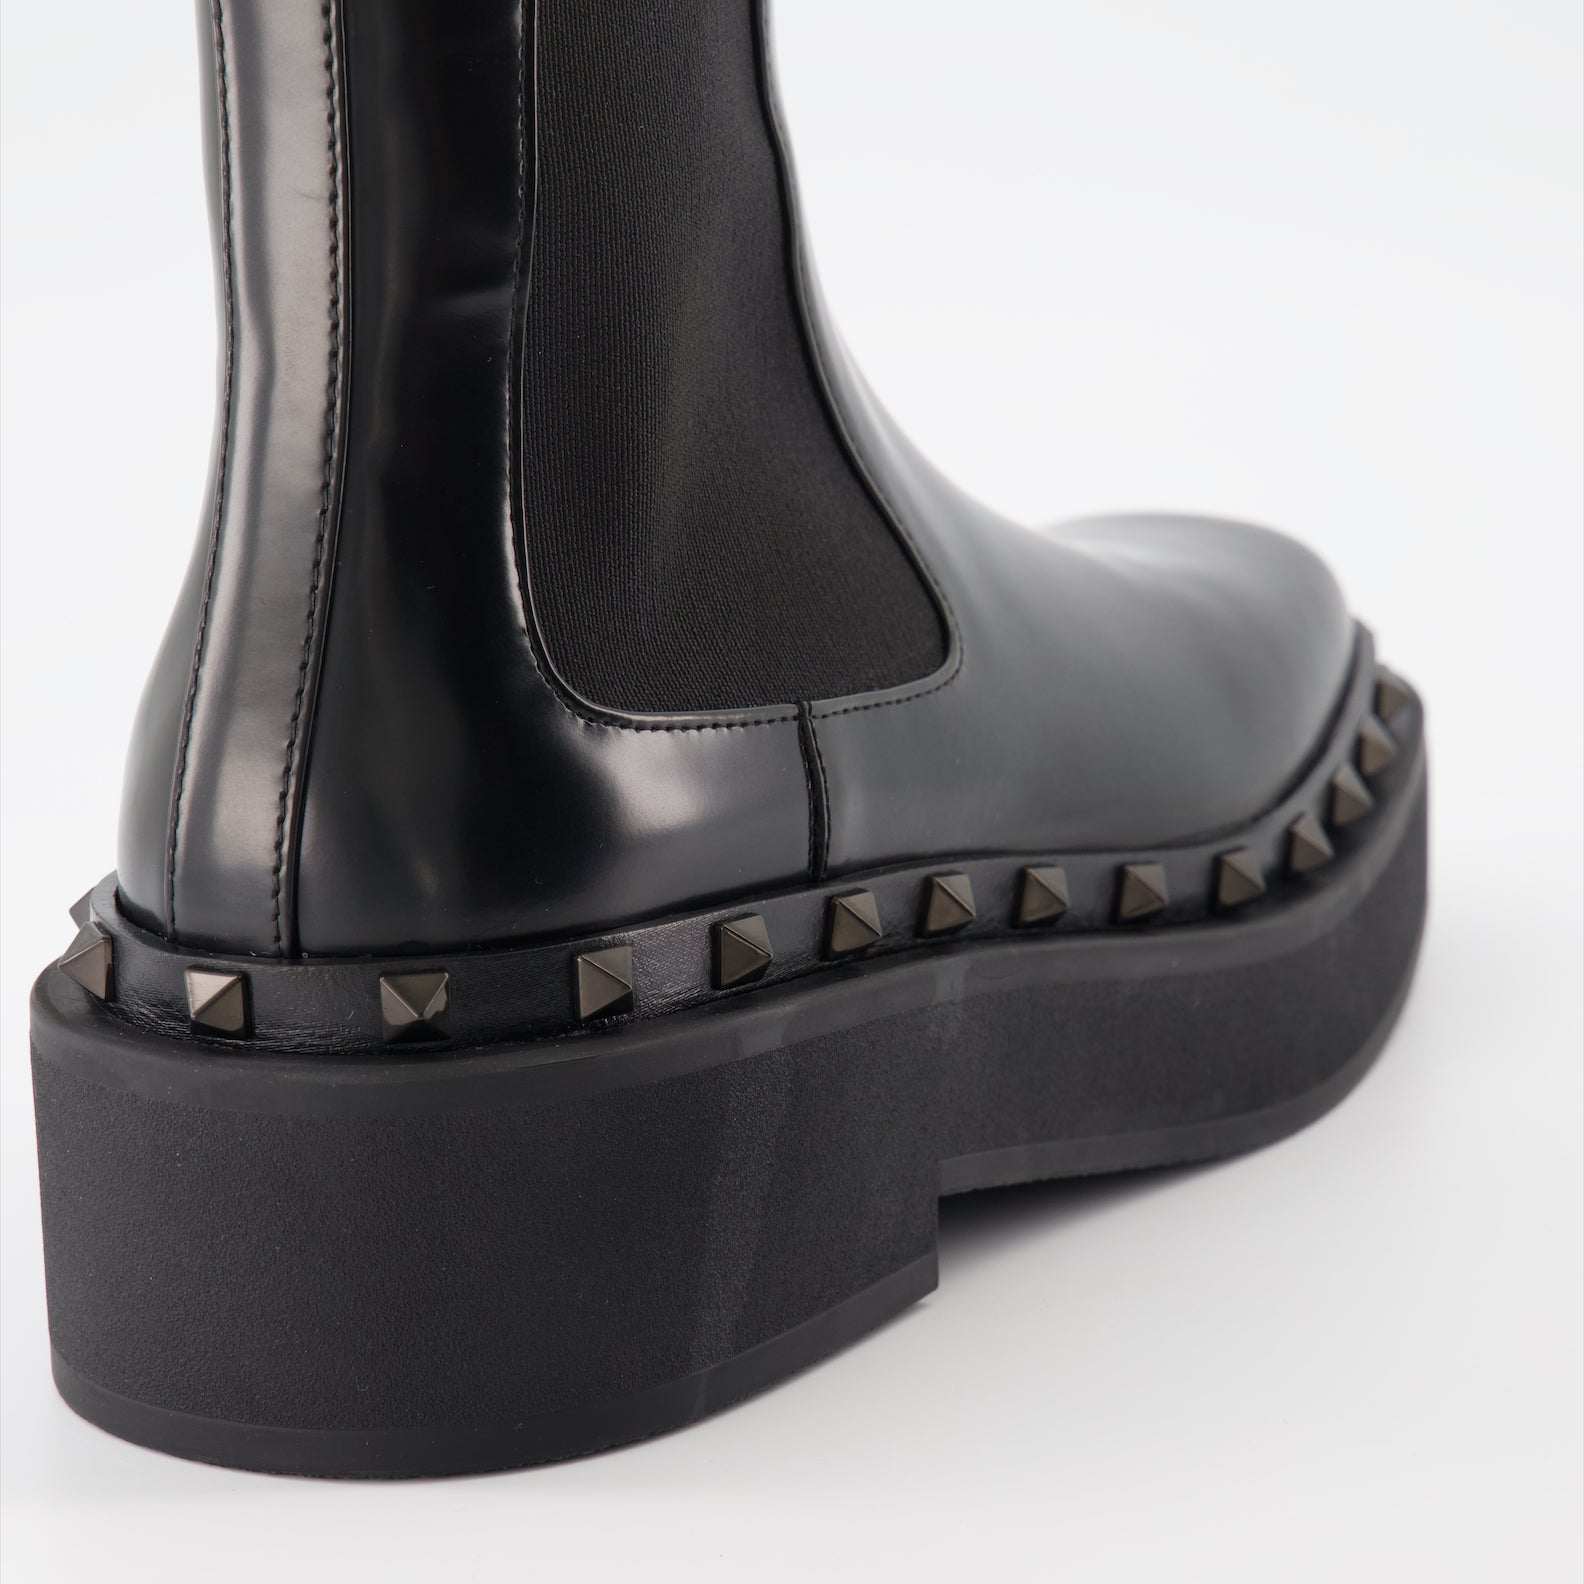 Rockstud M-Way ankle boots